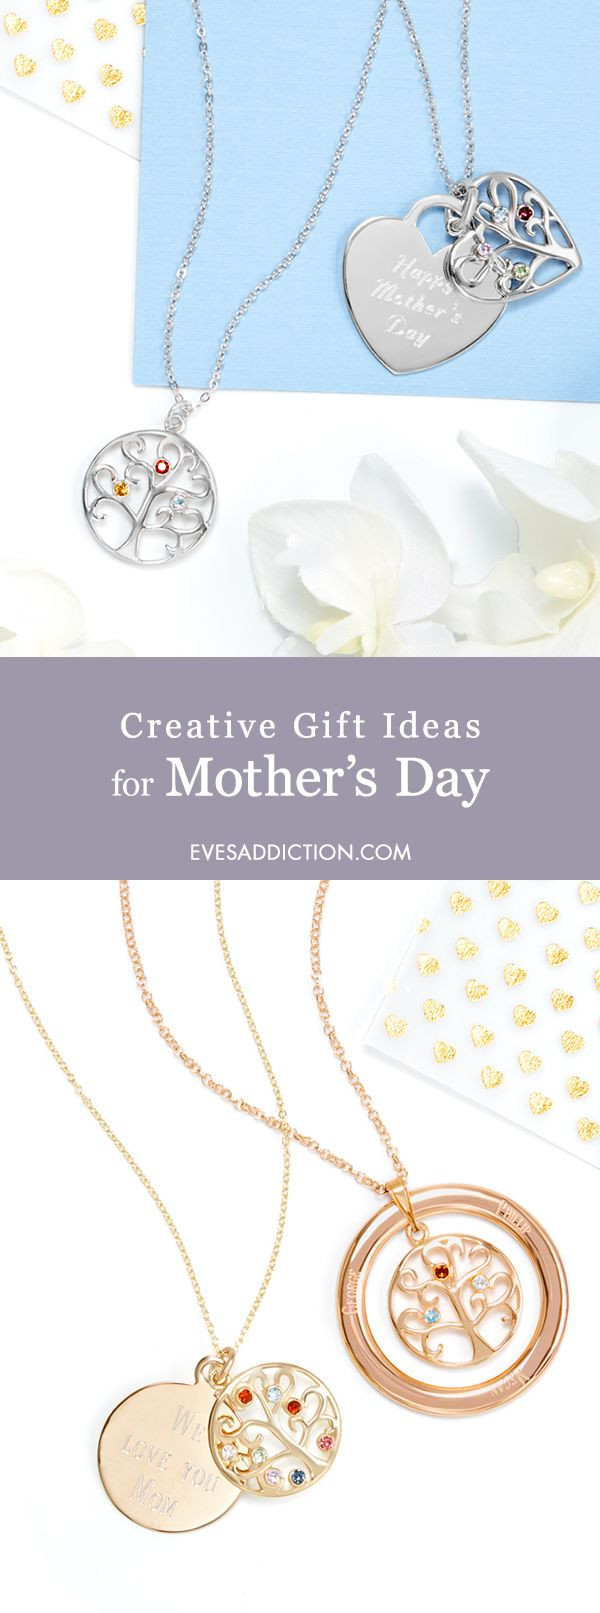 Mothers Day Unique Gift Ideas
 65 best images about Personalized Jewelry and Gifts on